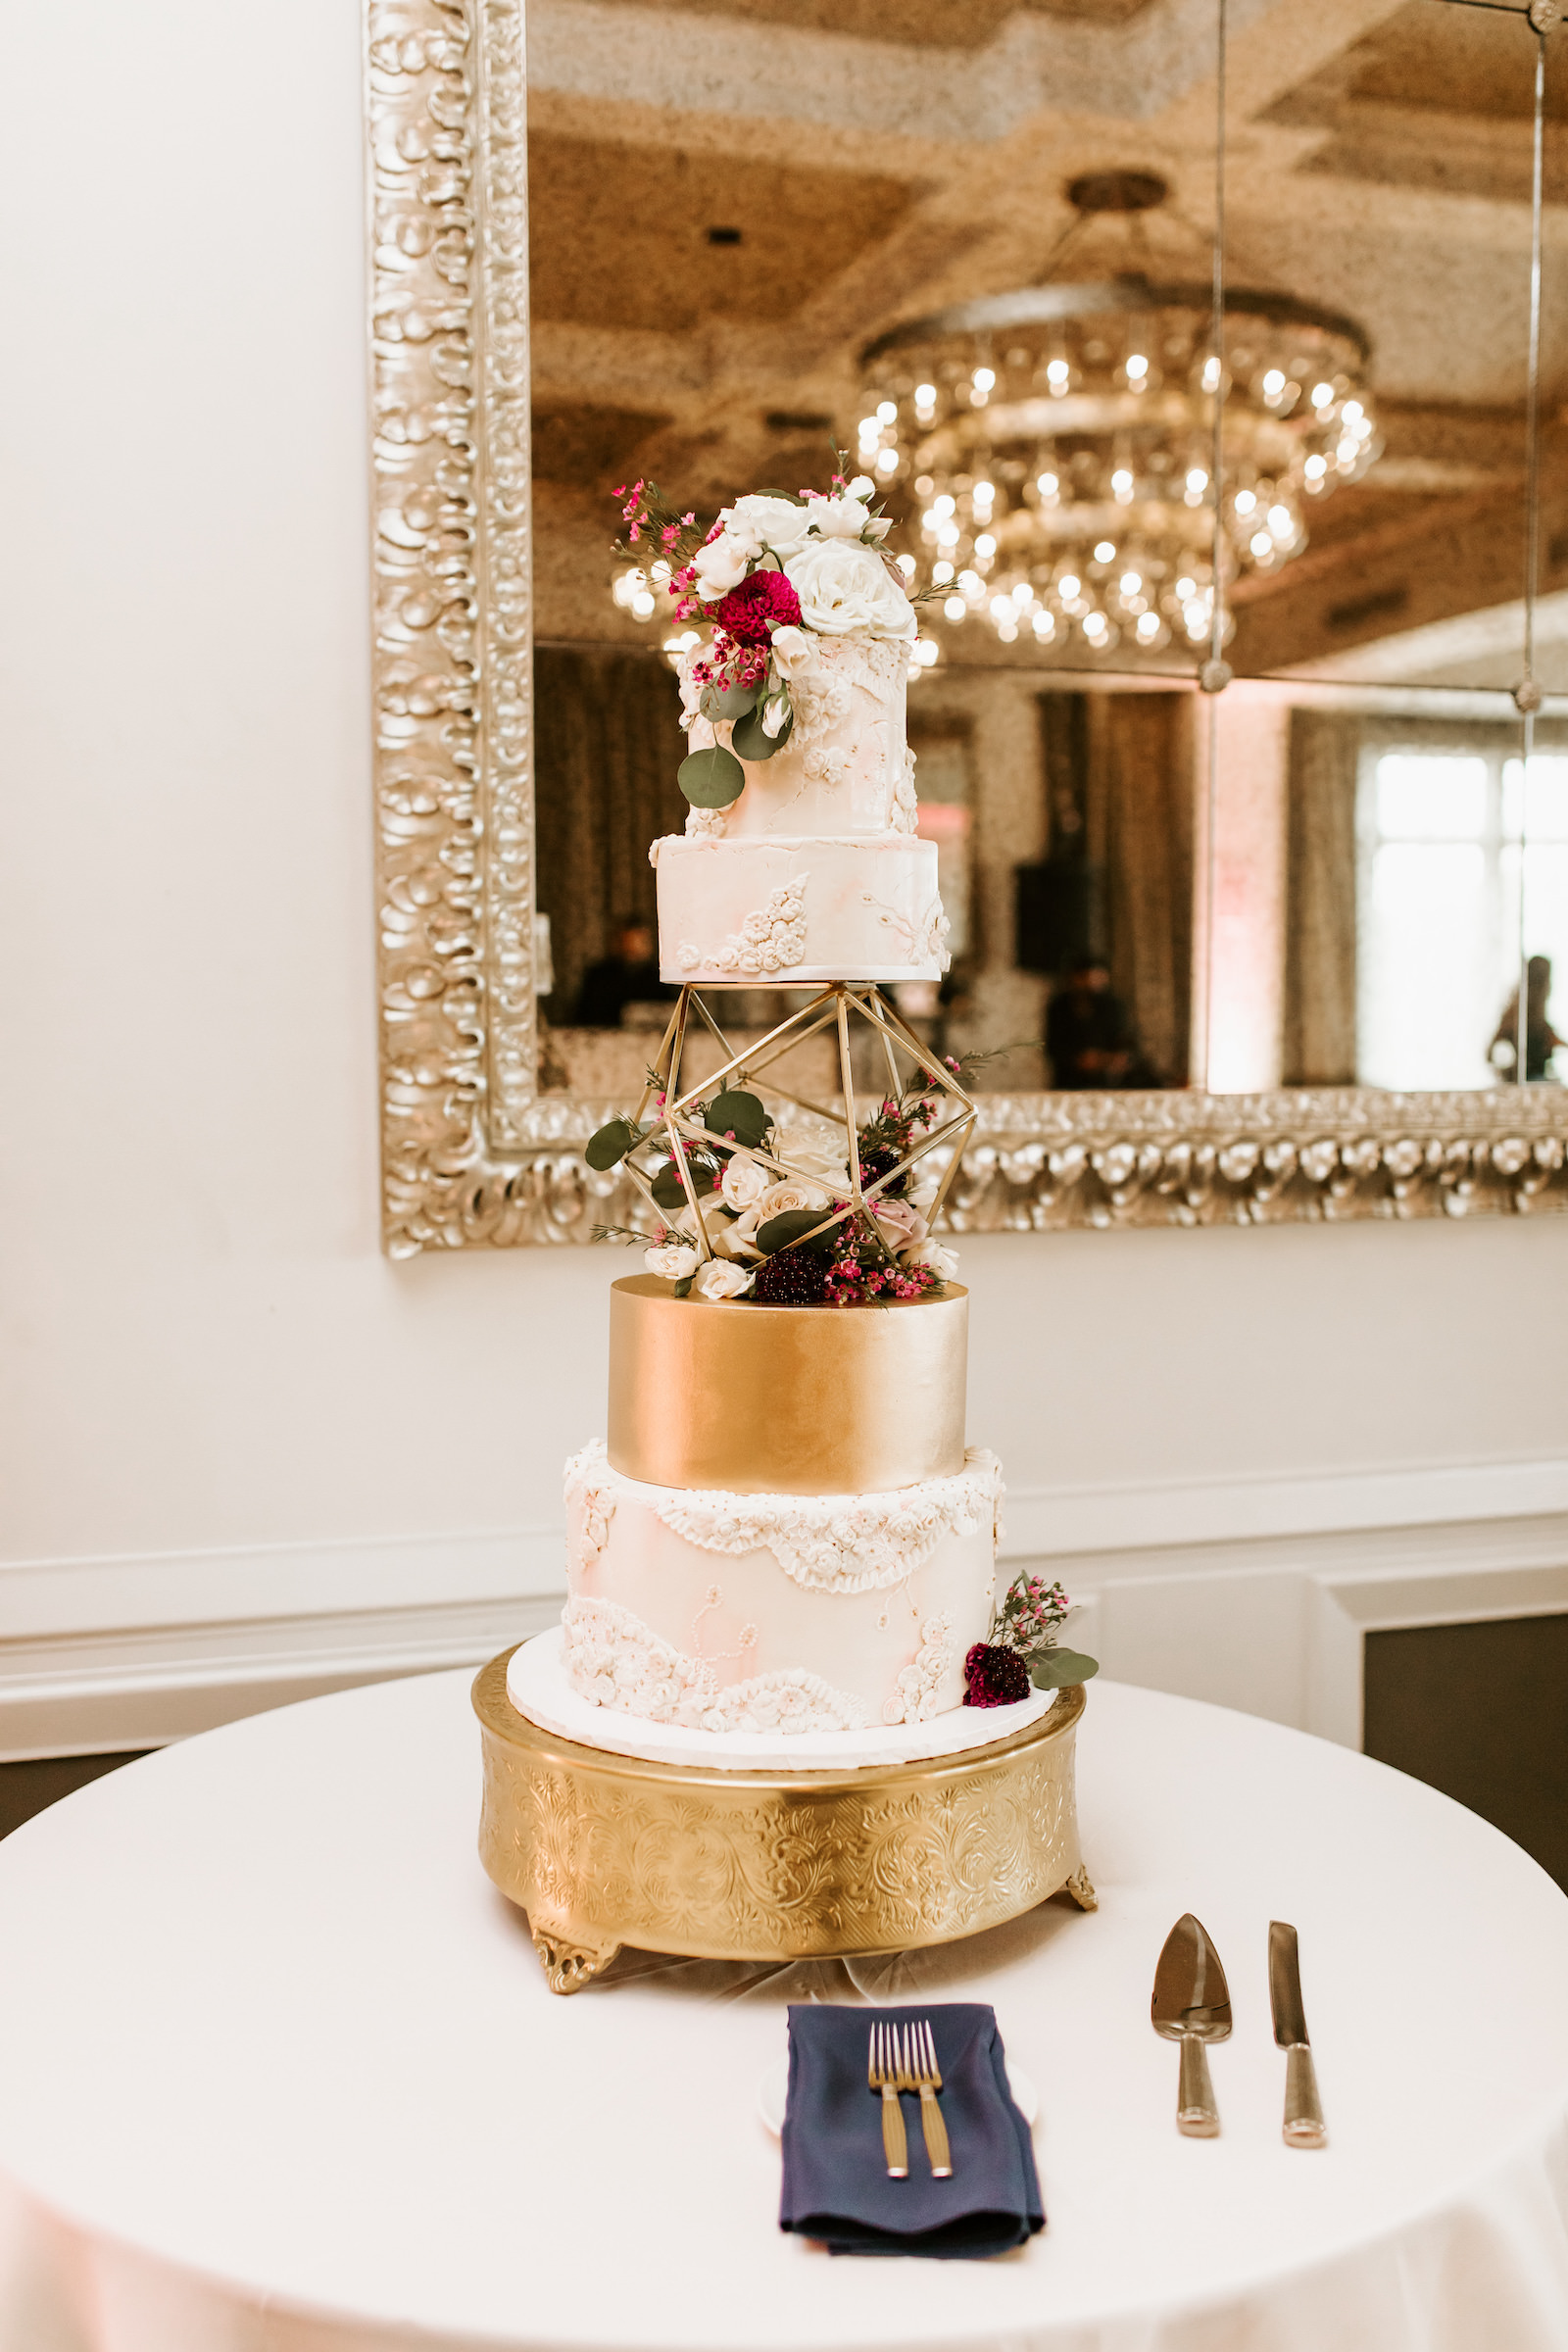 Four Tier Wedding Cake with Gold Geometric Orb Layer on Gold Ornate Stand by Tampa Cake Baker The Artistic Whisk | Piped Lace Buttercream Fondant Victorian Fancy Wedding Cake with White and Red Fresh Flowers Roses and Greenery